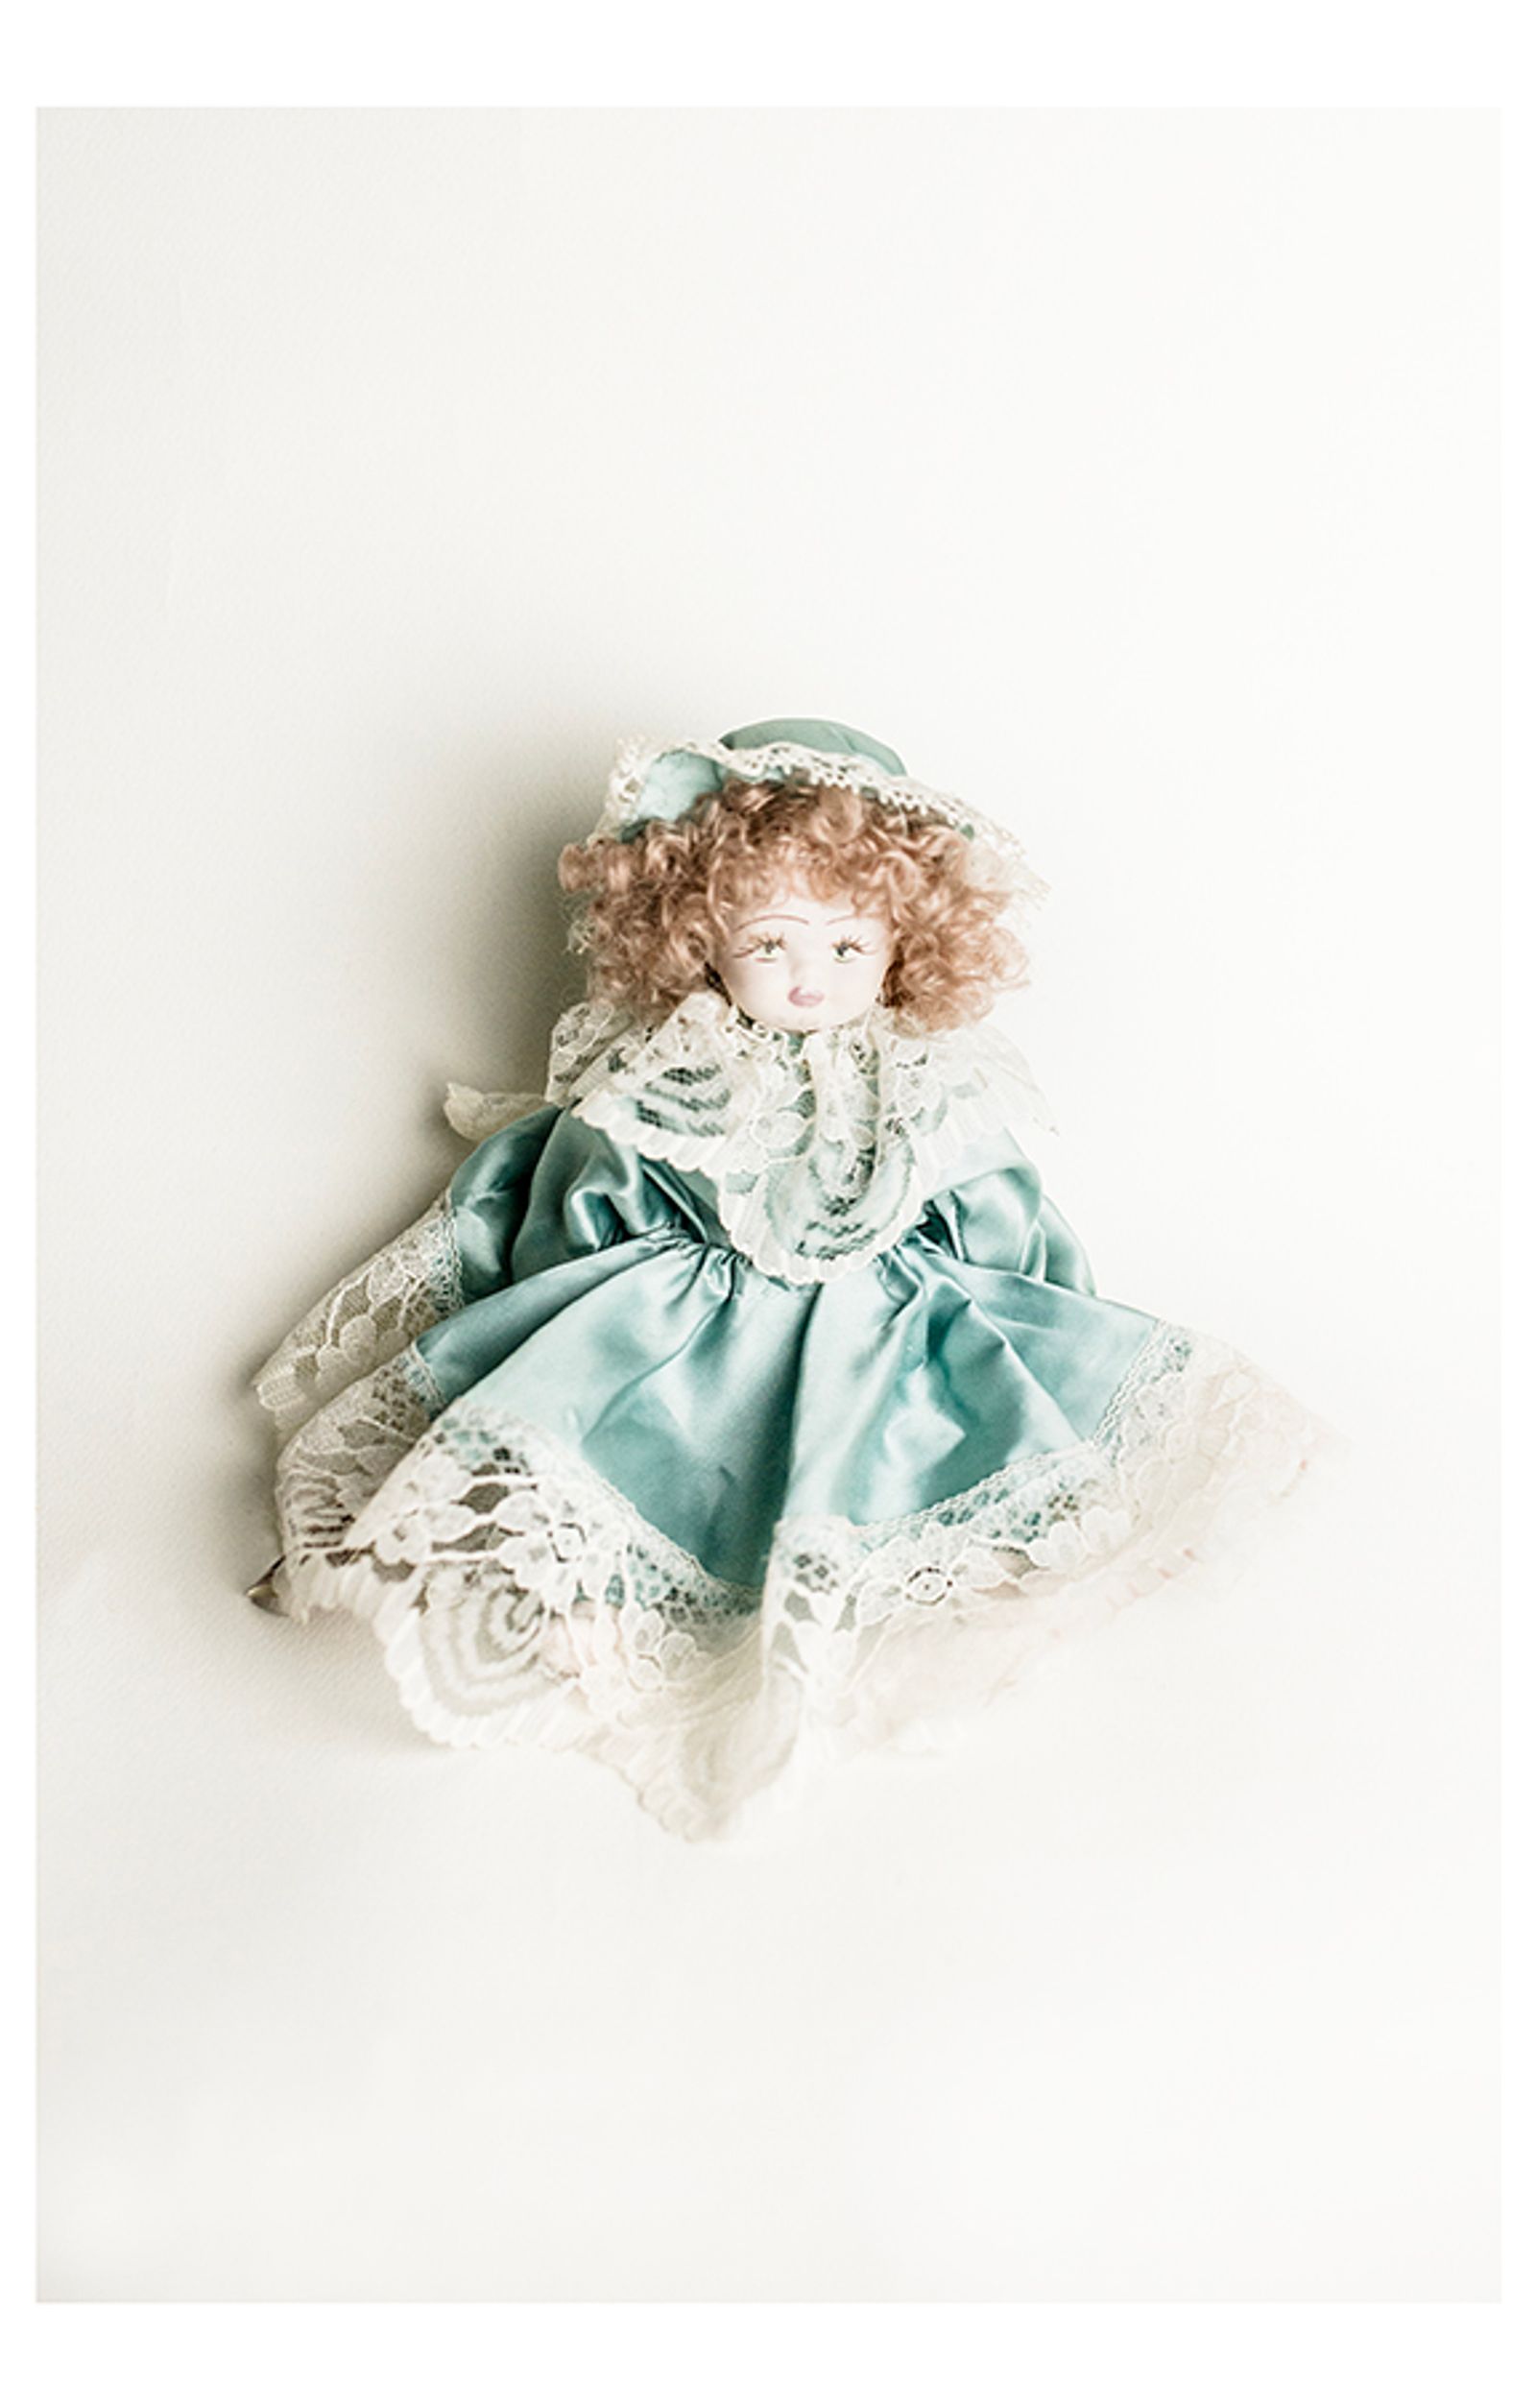 © Claudia Corrent - Image from the fifty years photography project